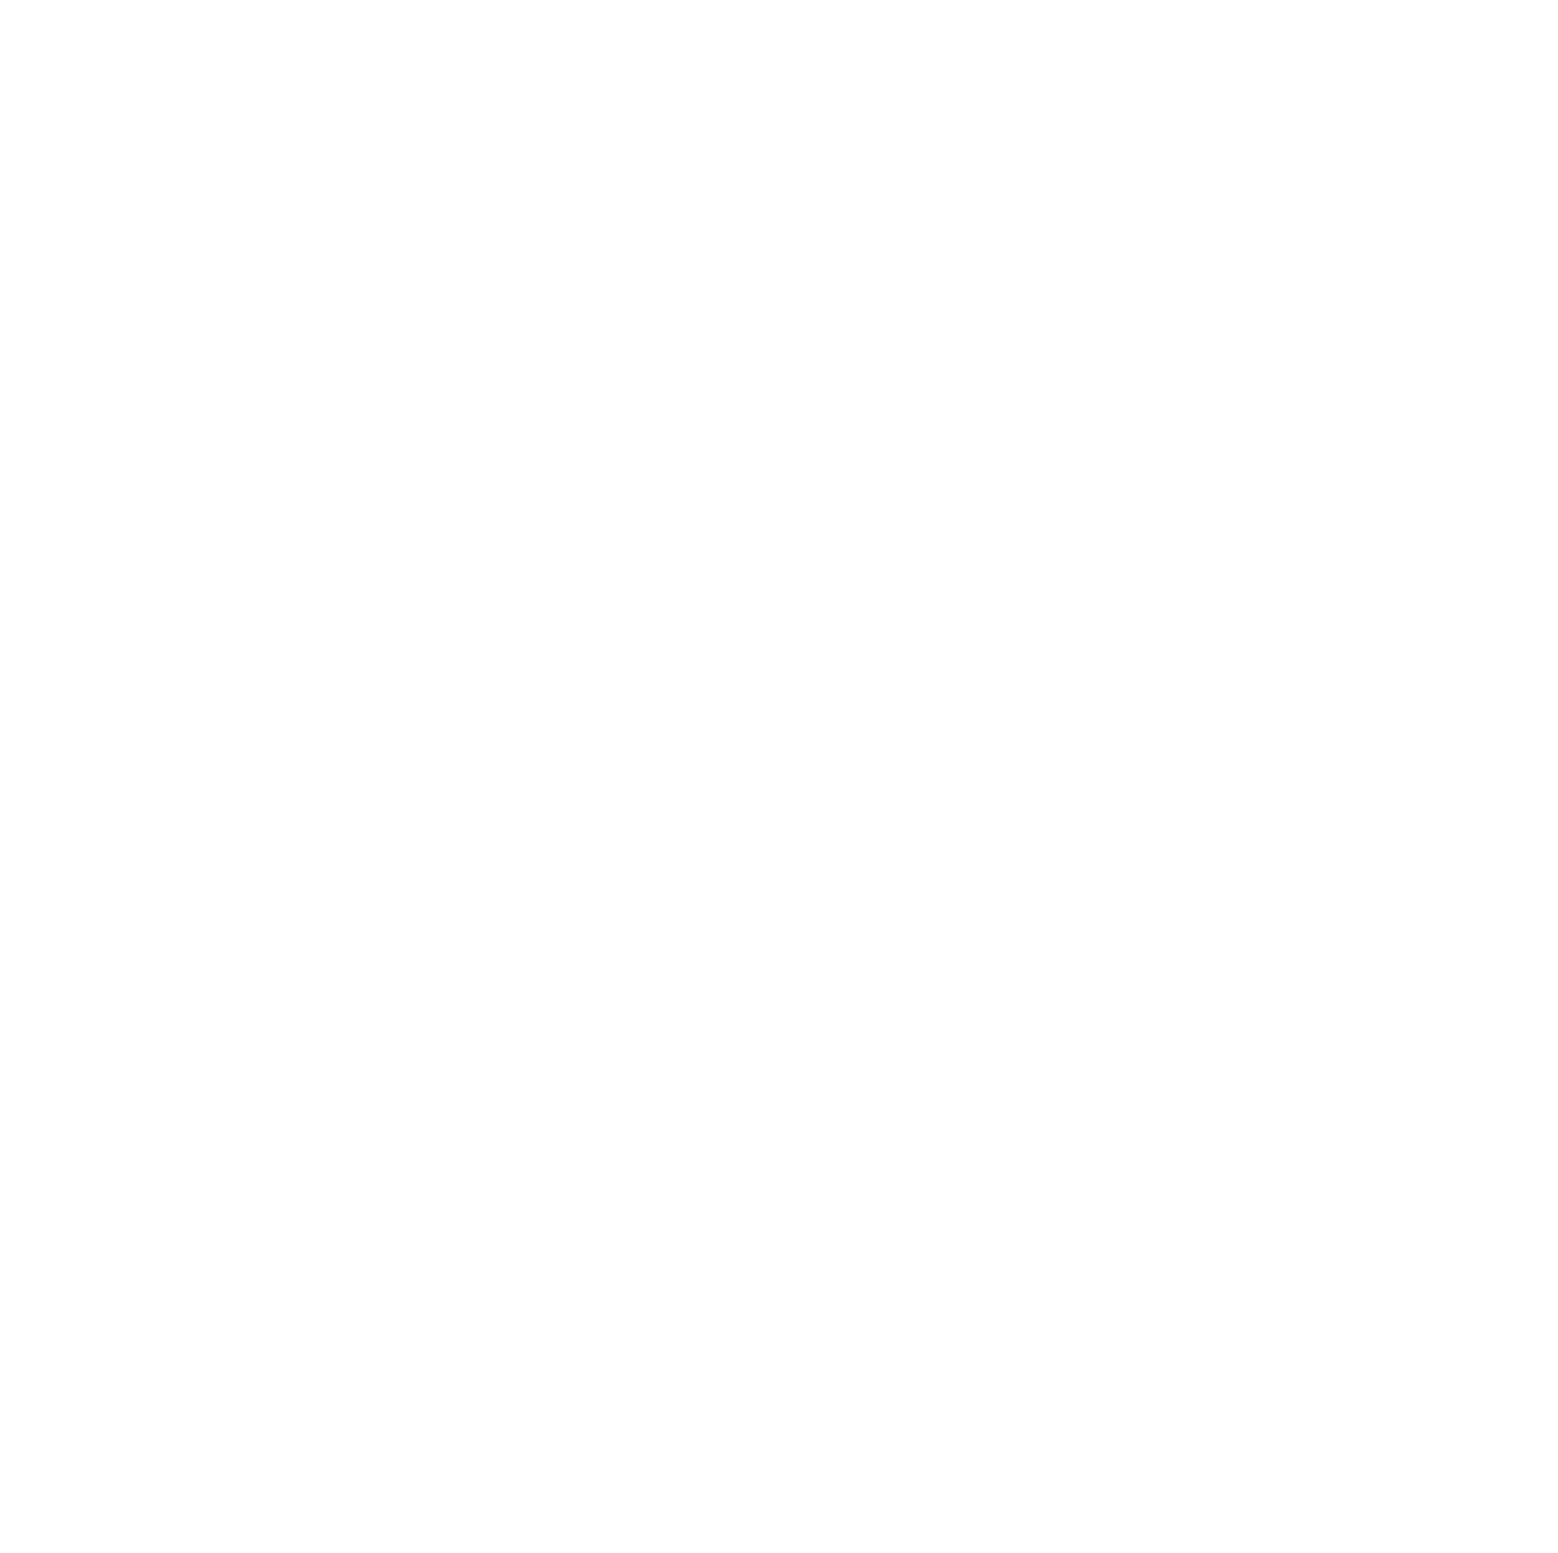 OneWater Marine logo for dark backgrounds (transparent PNG)